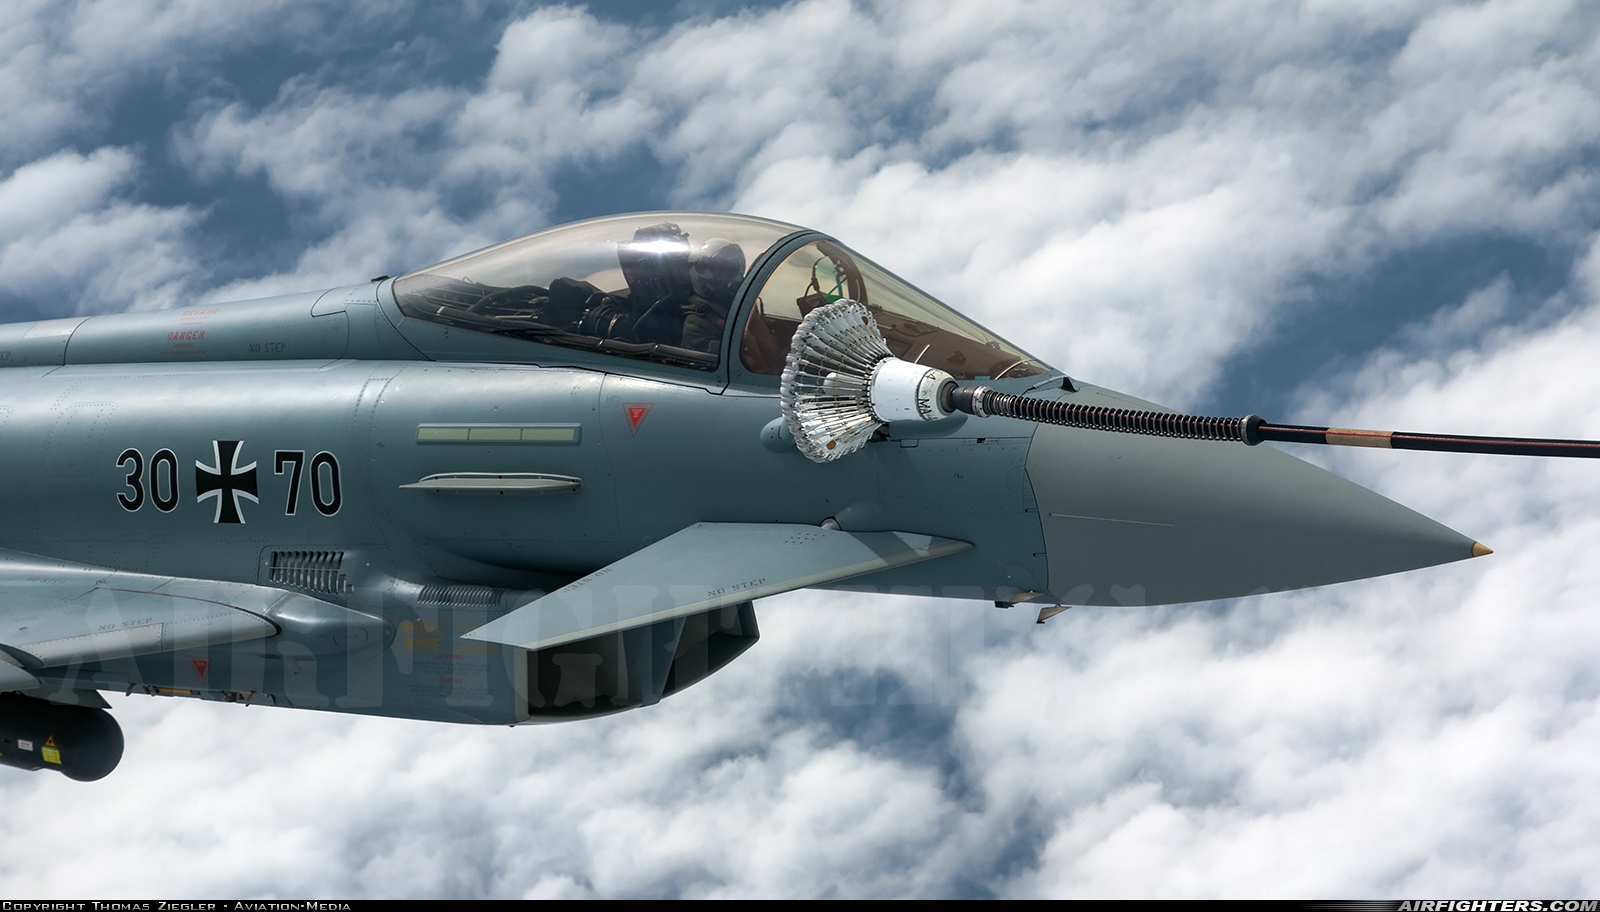 Germany - Air Force Eurofighter EF-2000 Typhoon S 30+70 at North Sea, International Airspace